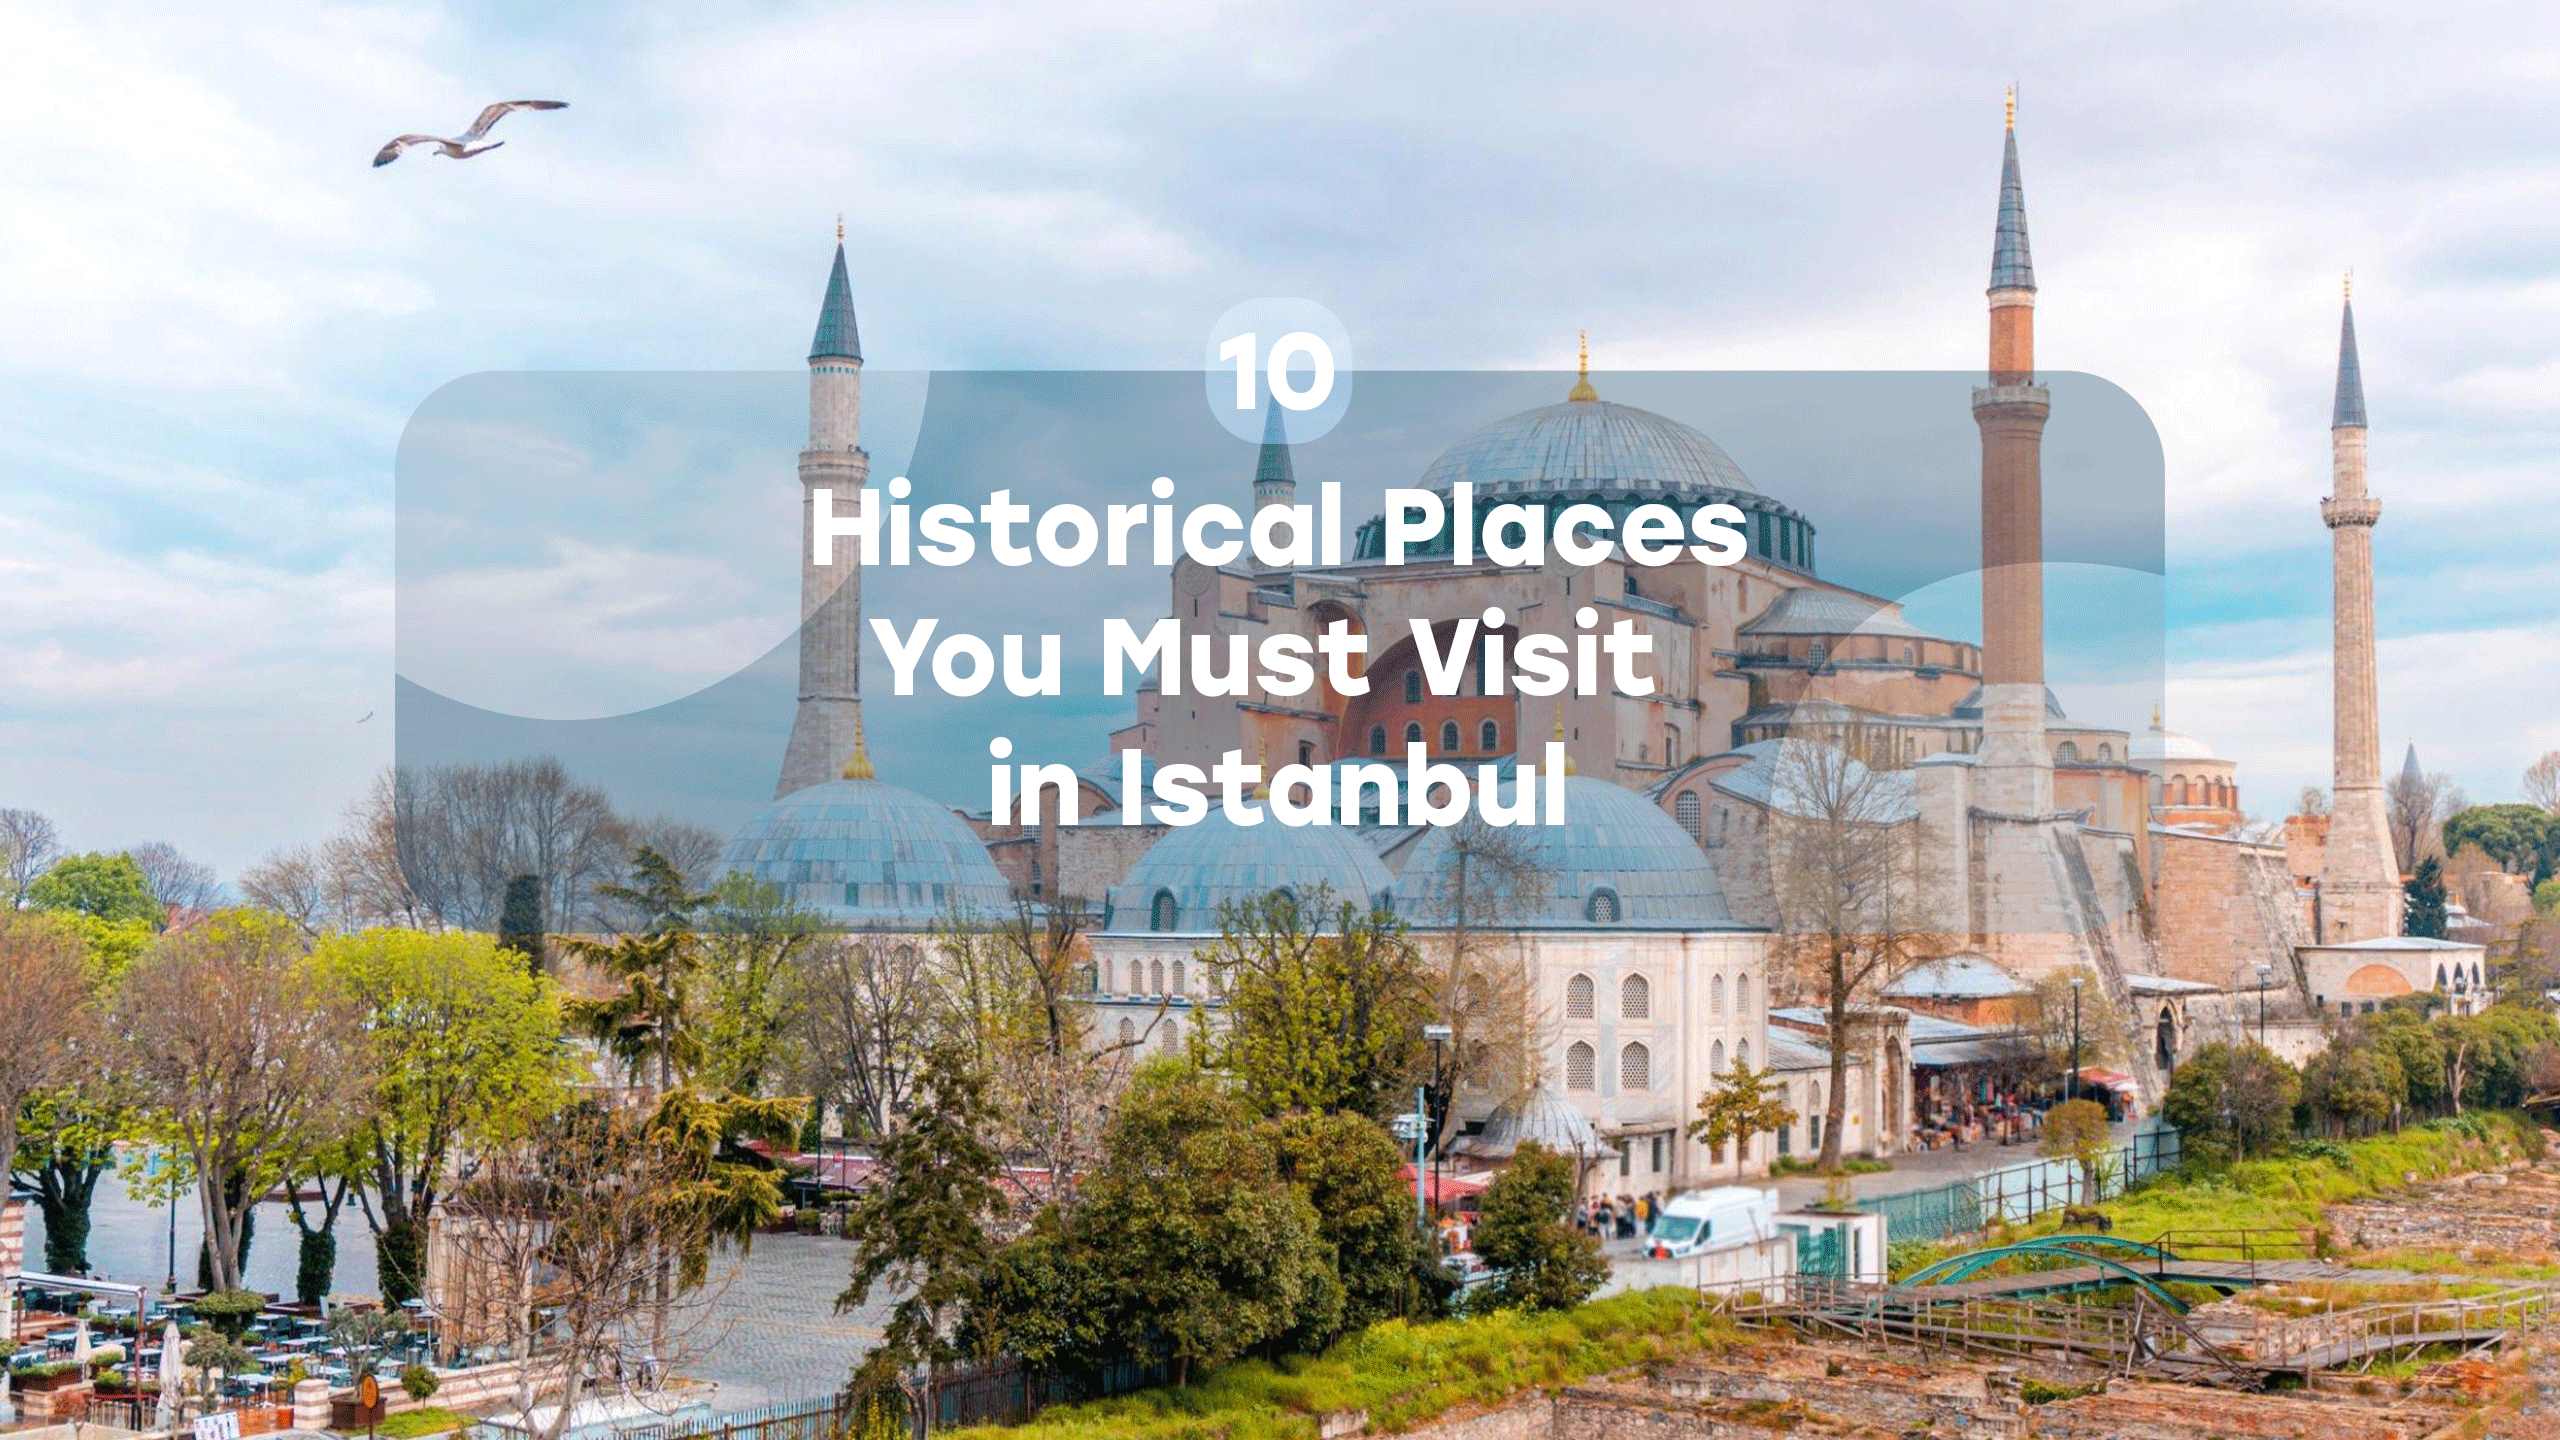 10 Historical Places You Must Visit in Istanbul Everytours Travel Antalya